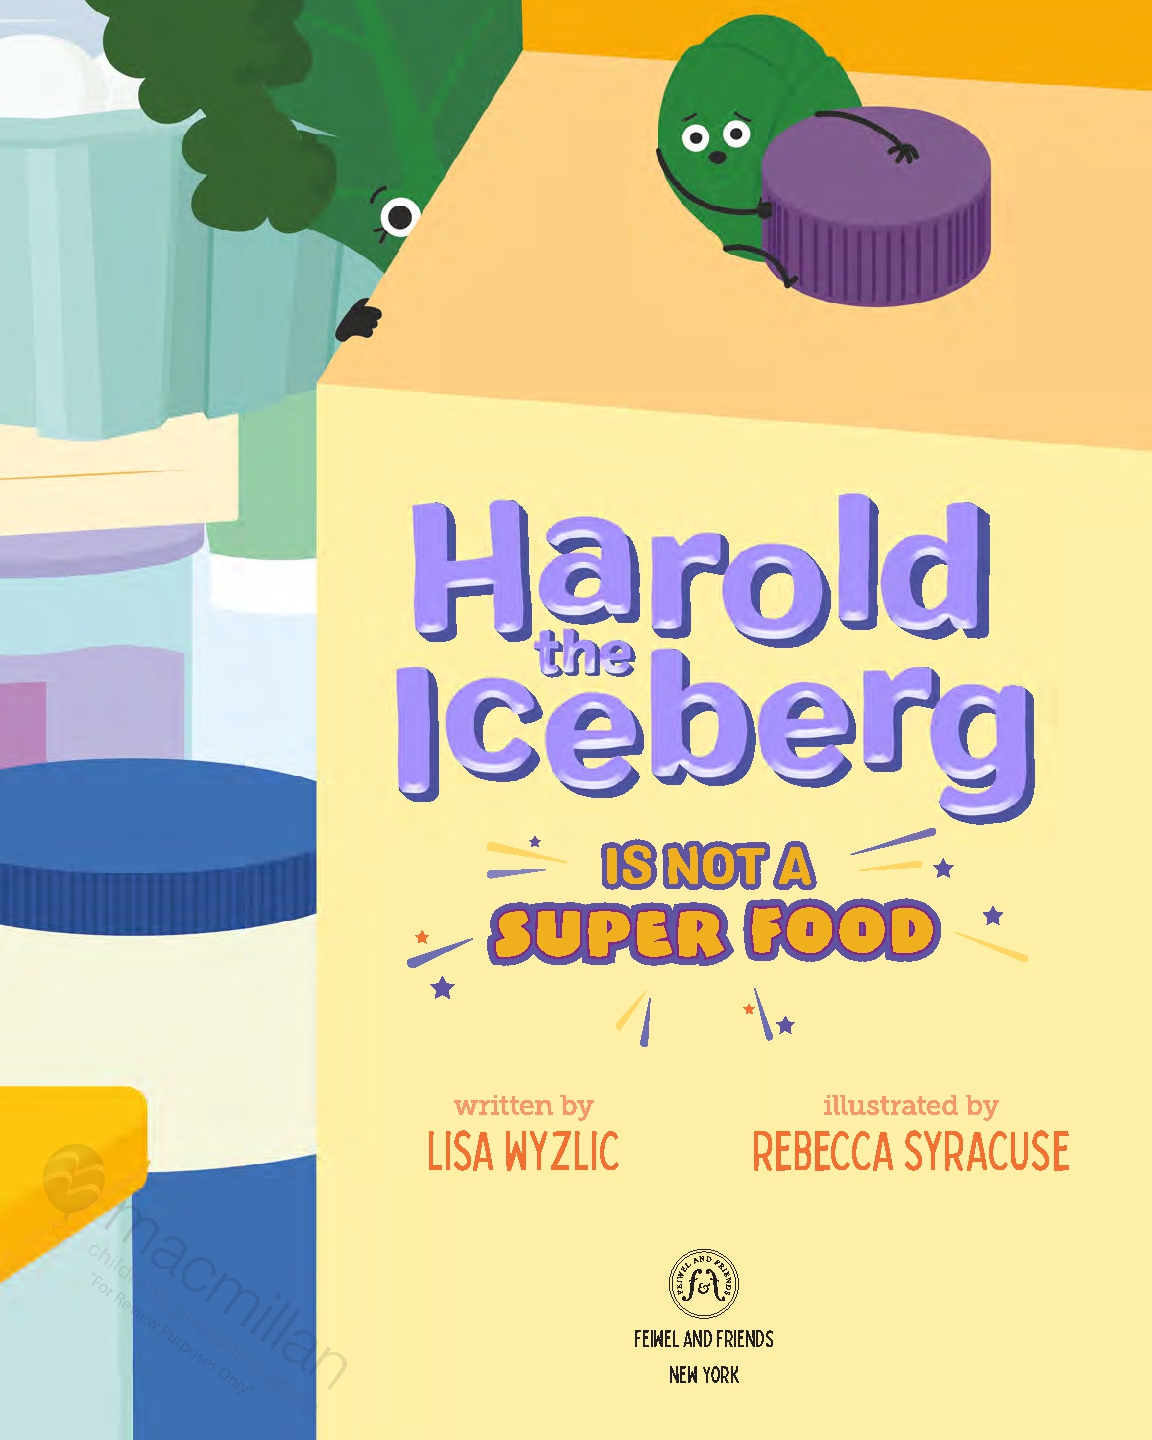 Harold the Iceberg Is Not a Super Food